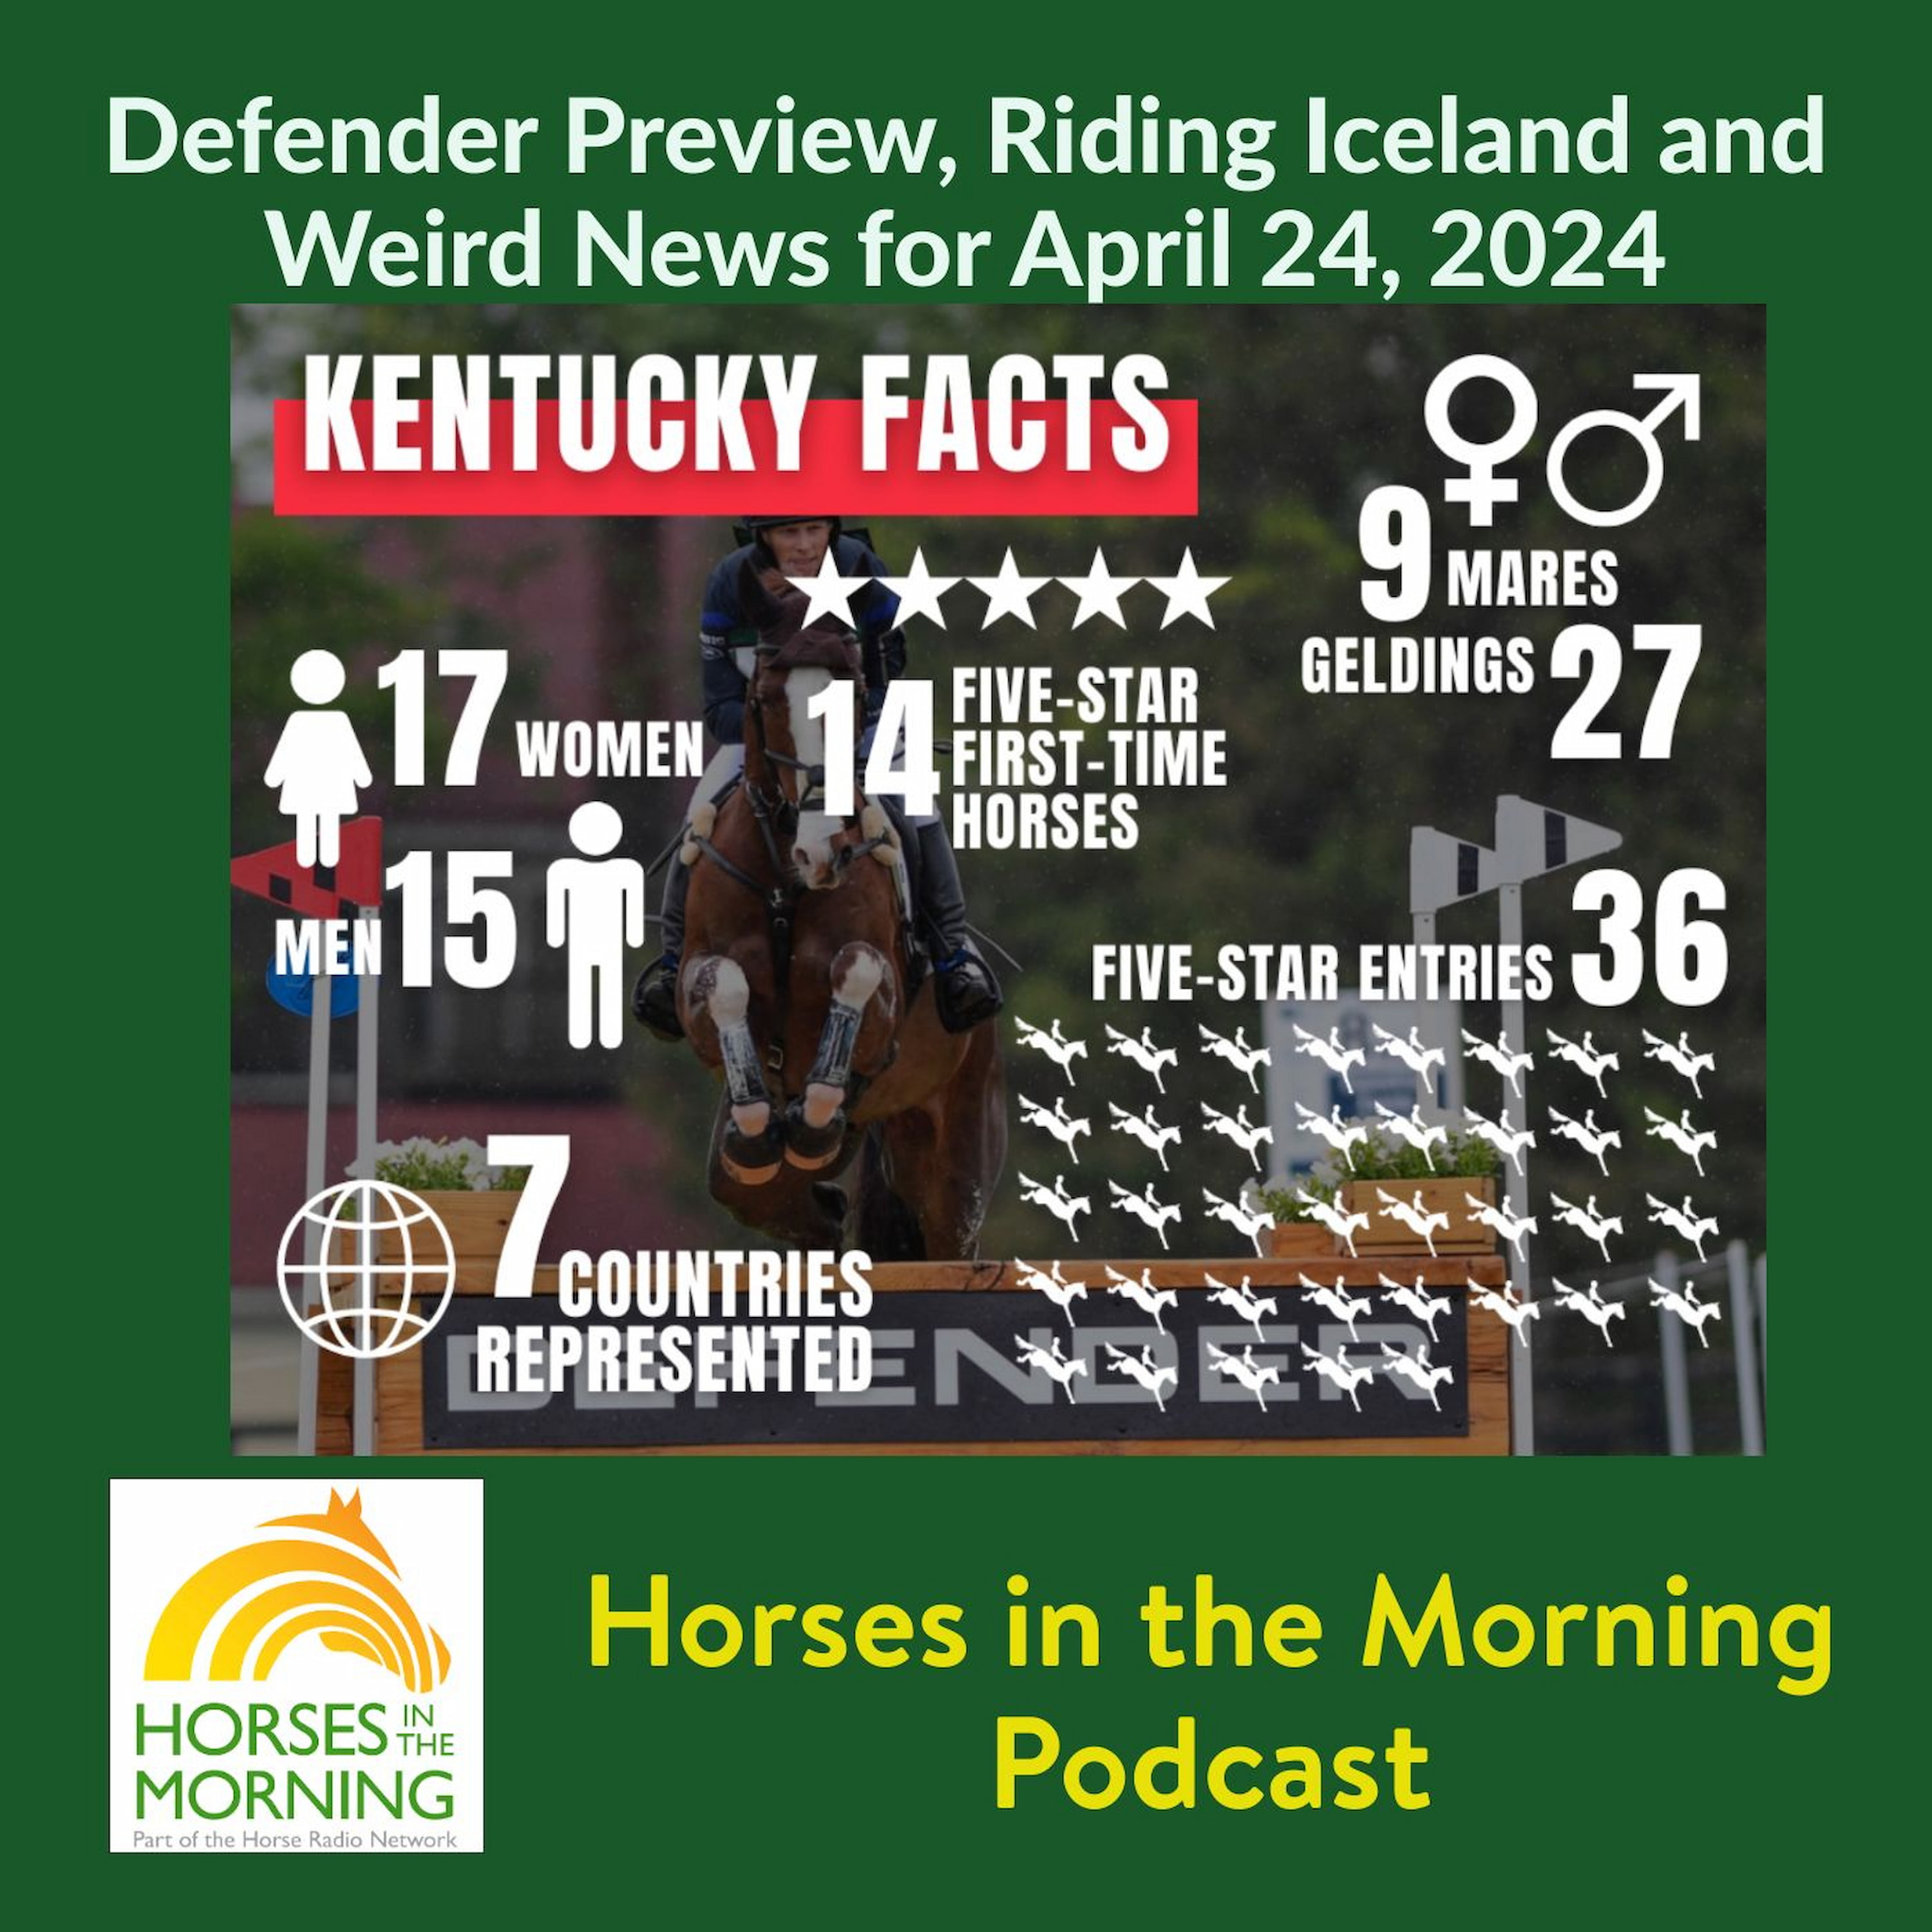 Defender Preview, Riding Iceland and Weird News for April 24, 2024